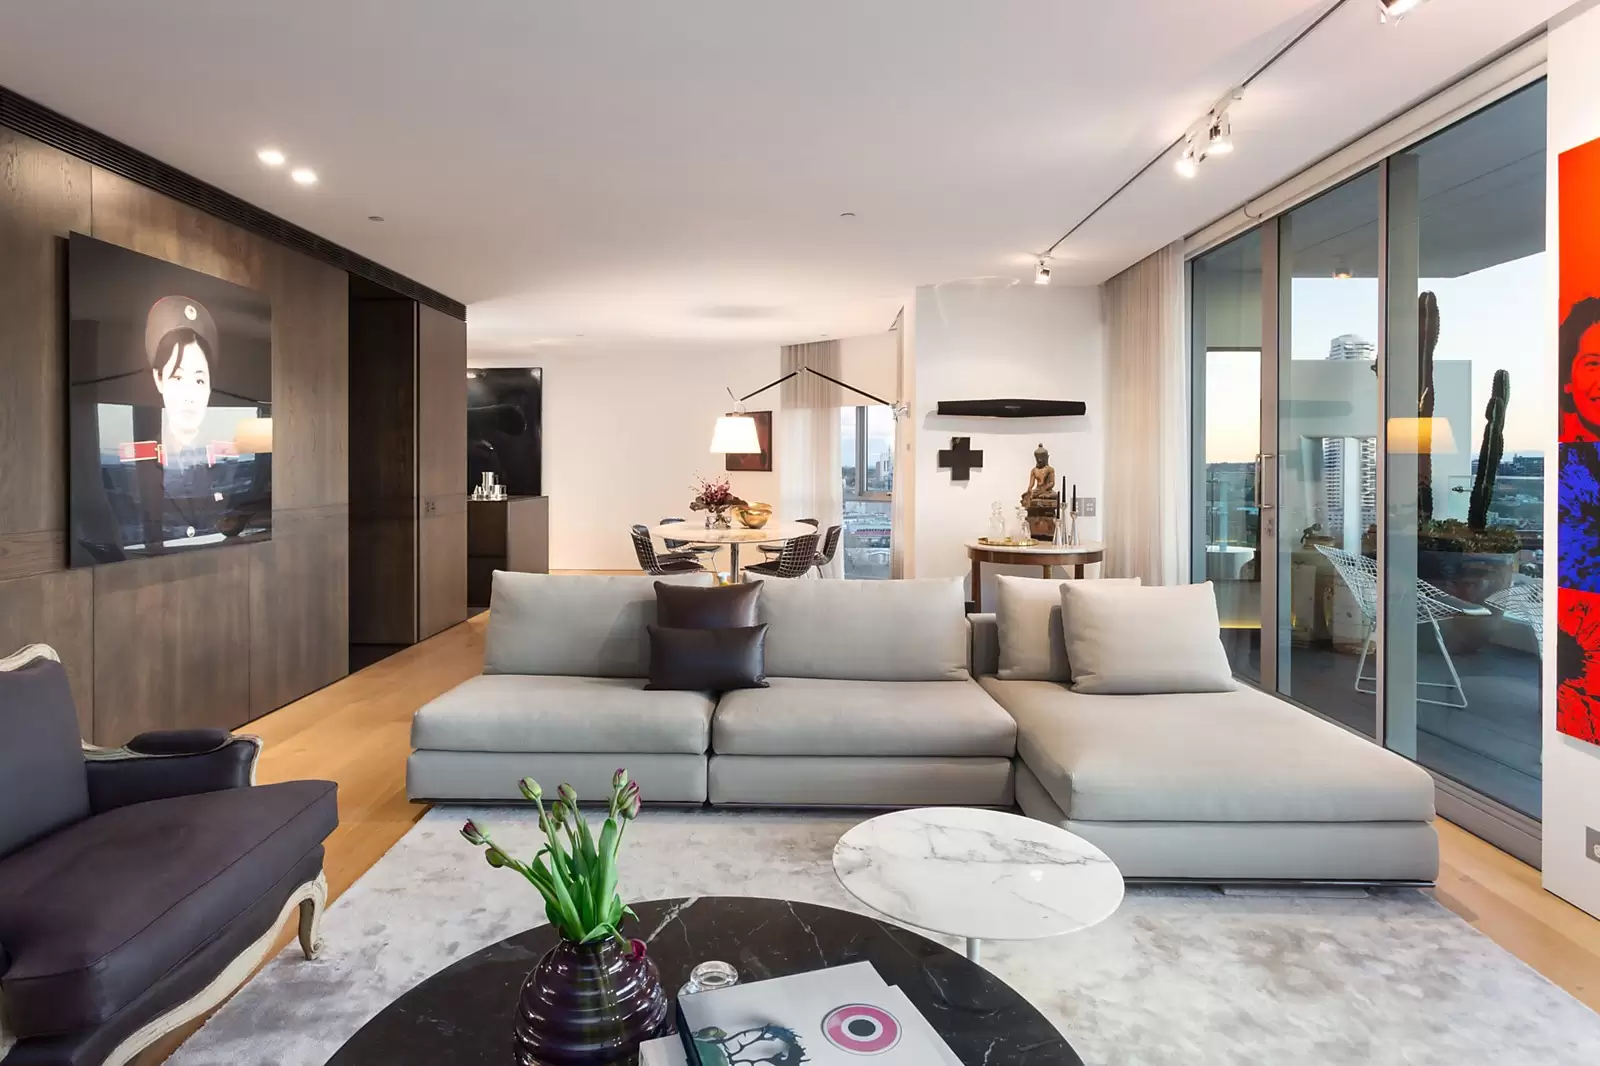 Photo #10: 1401/81 Macleay Street, Potts Point - Sold by Sydney Sotheby's International Realty